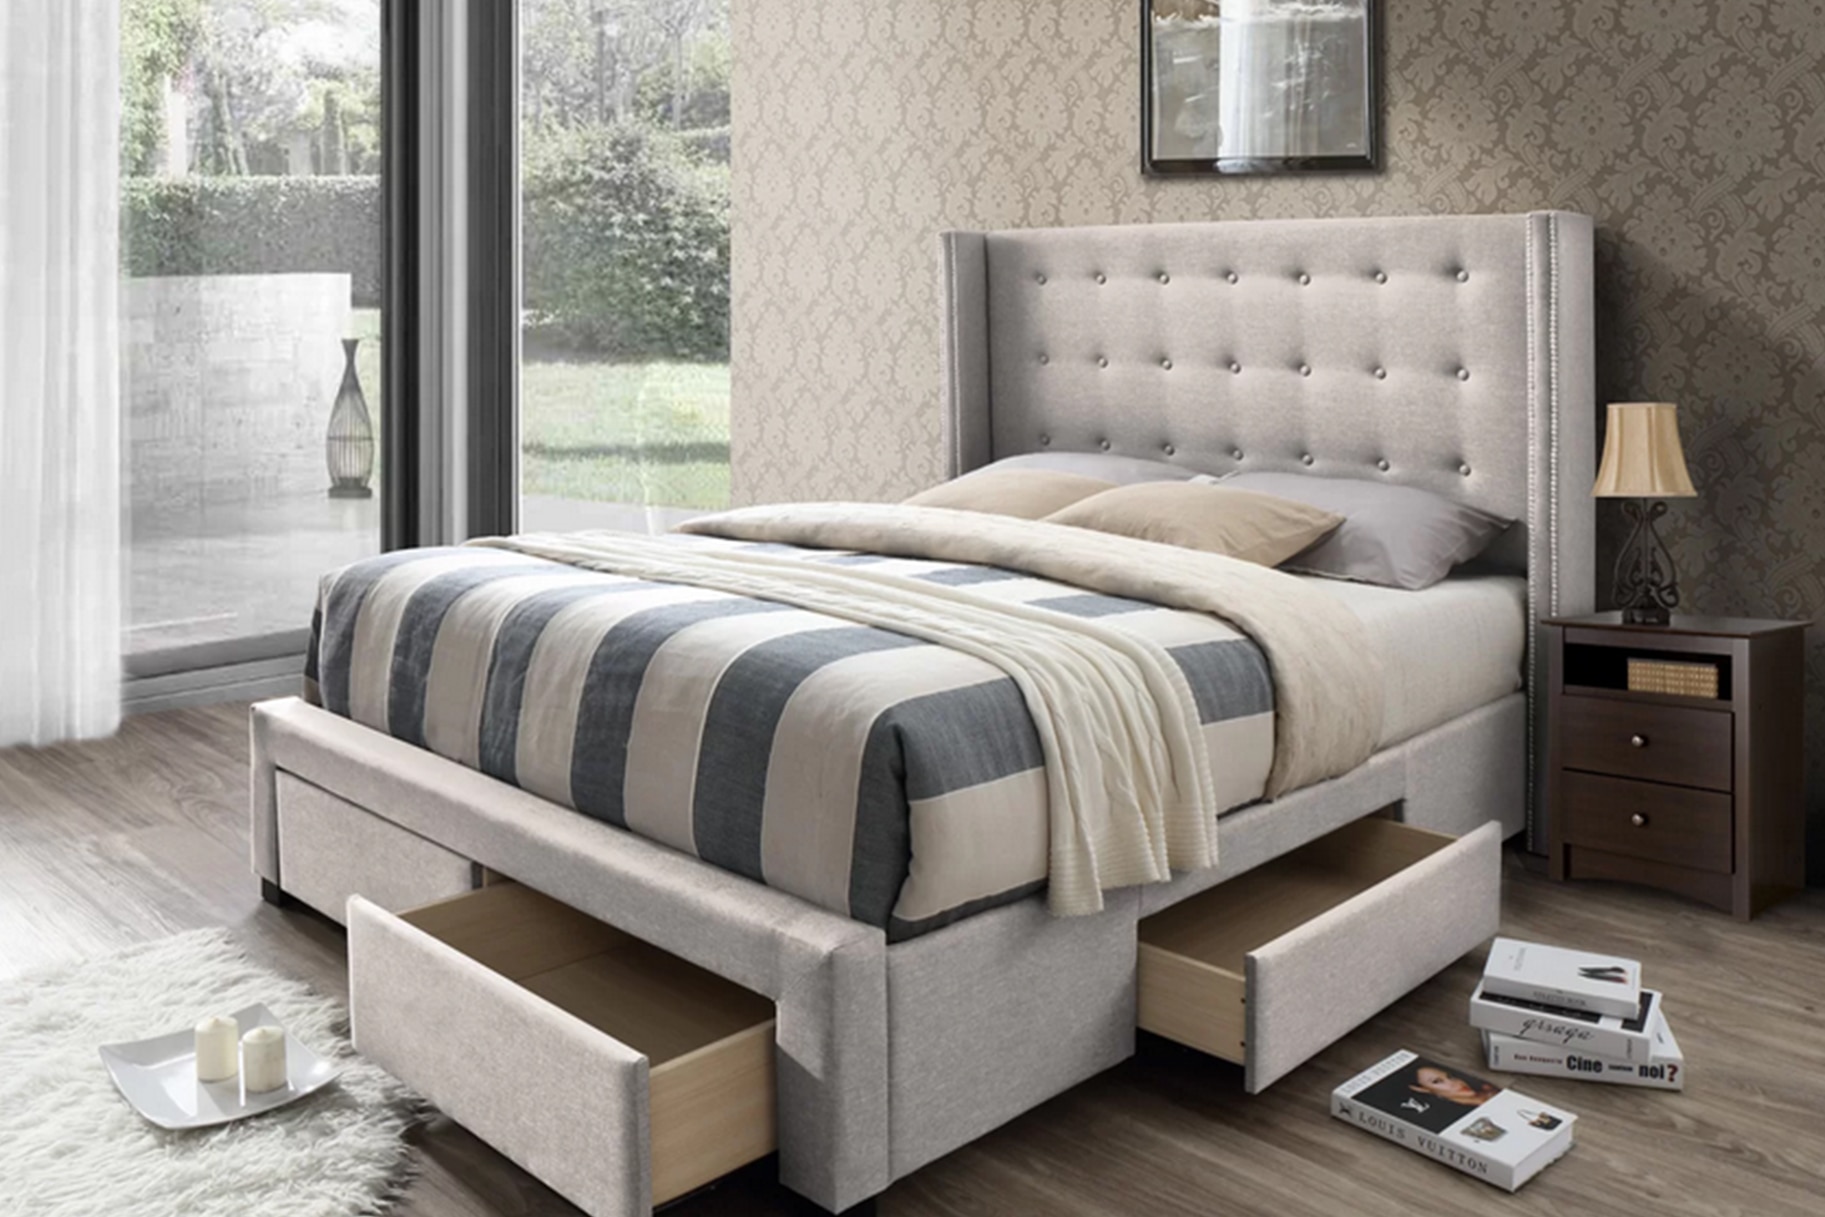 Best Storage Beds To Buy Now: Review